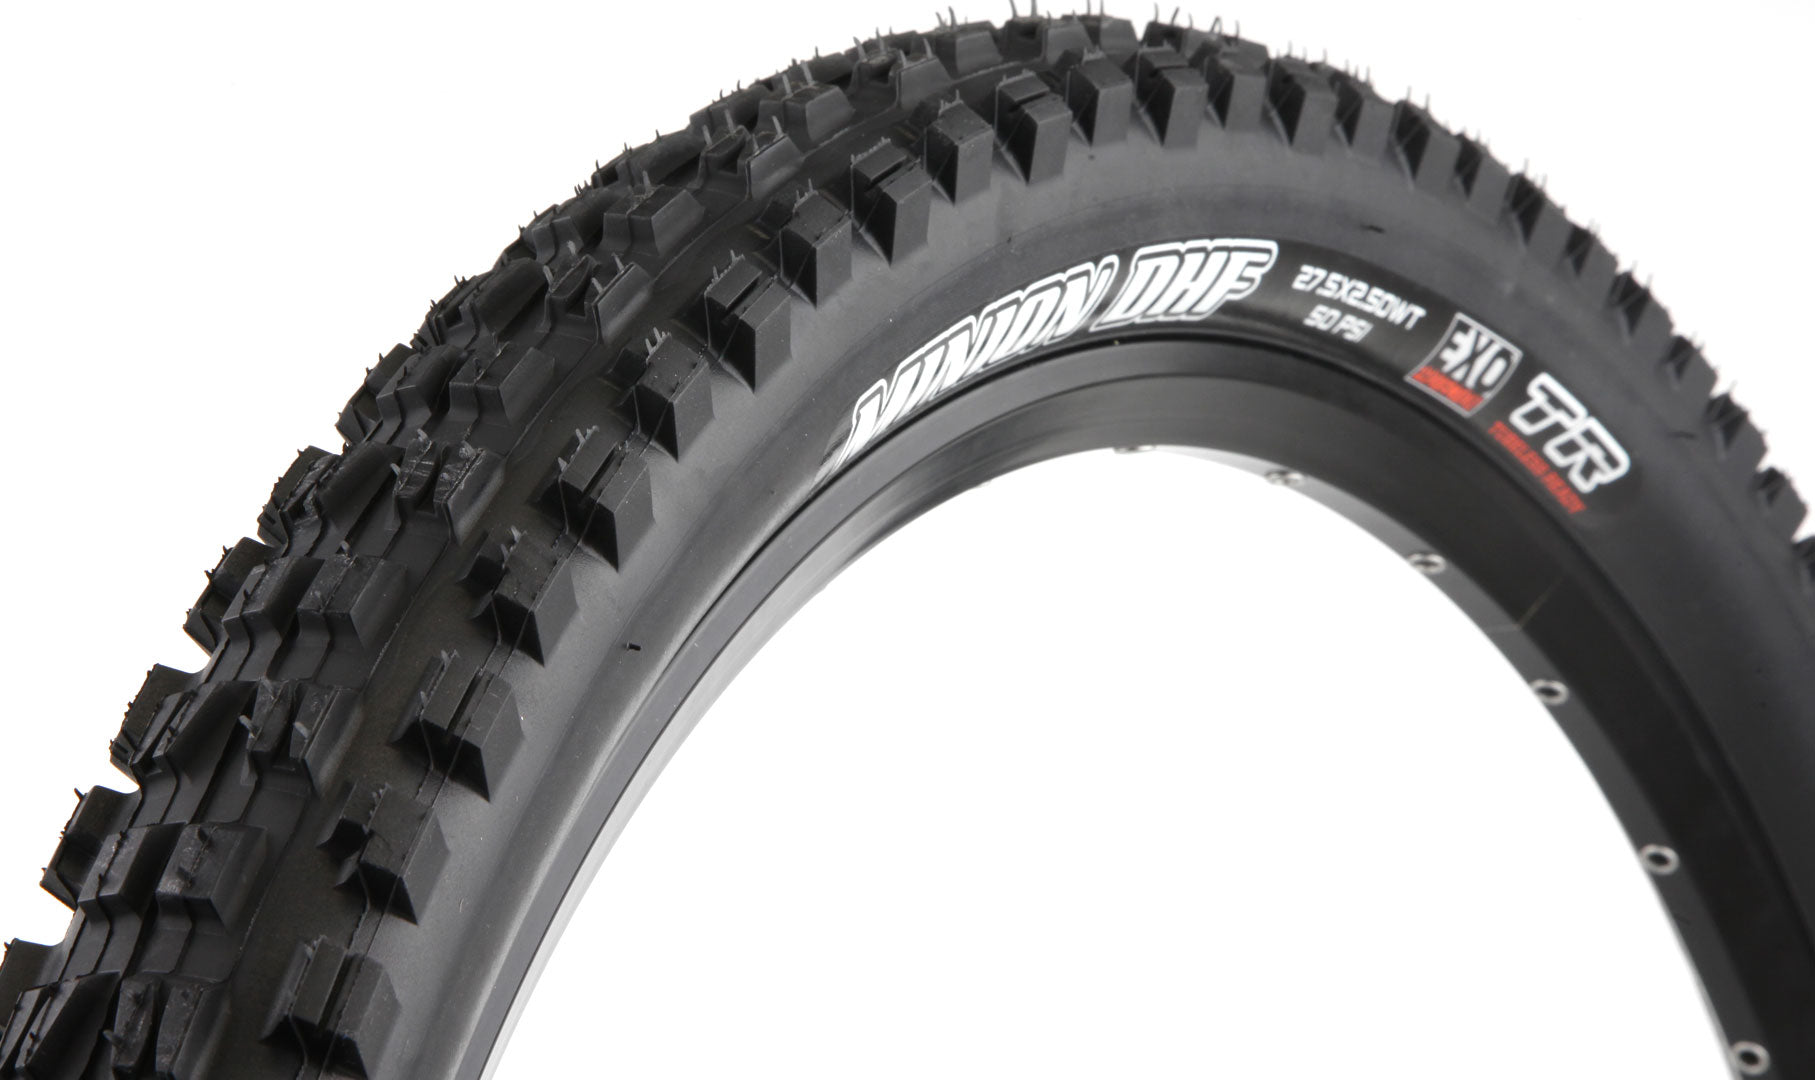 Pneu Maxxis Minion DHF Wide Trail - EXO Protection - Dual 62a/60a - Tubeless Ready jante